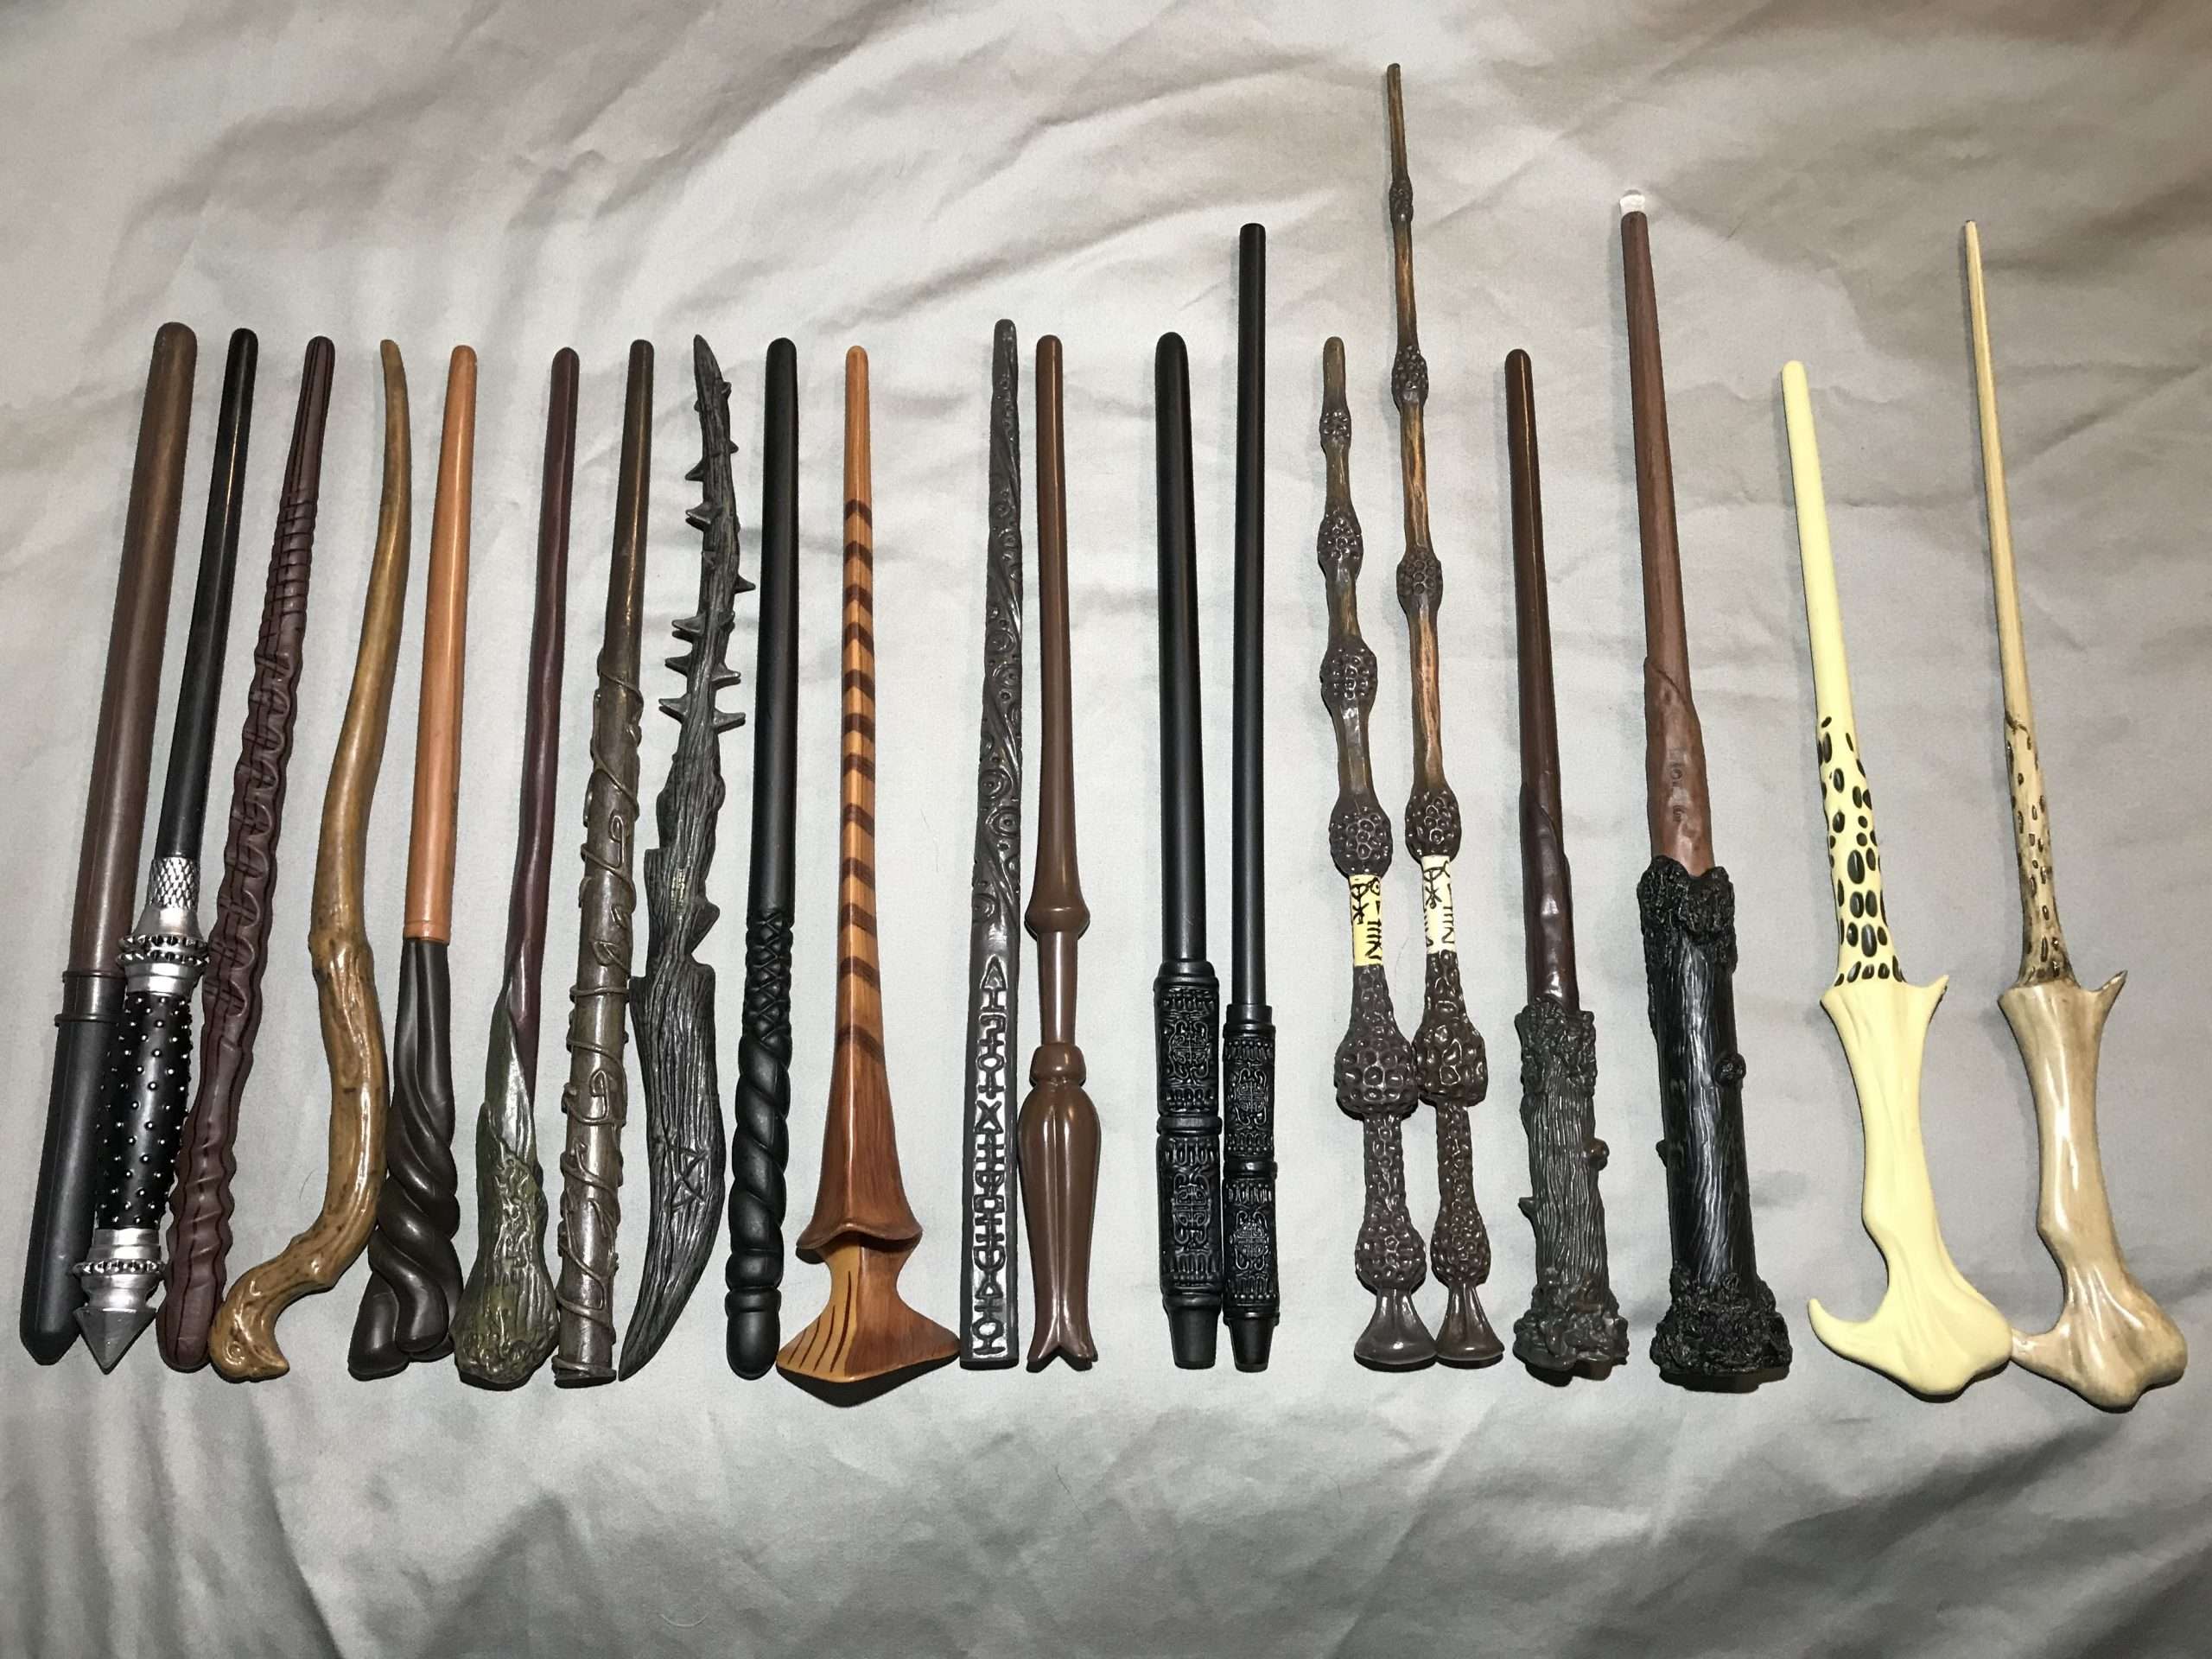 Show Your Harry Potter Wands